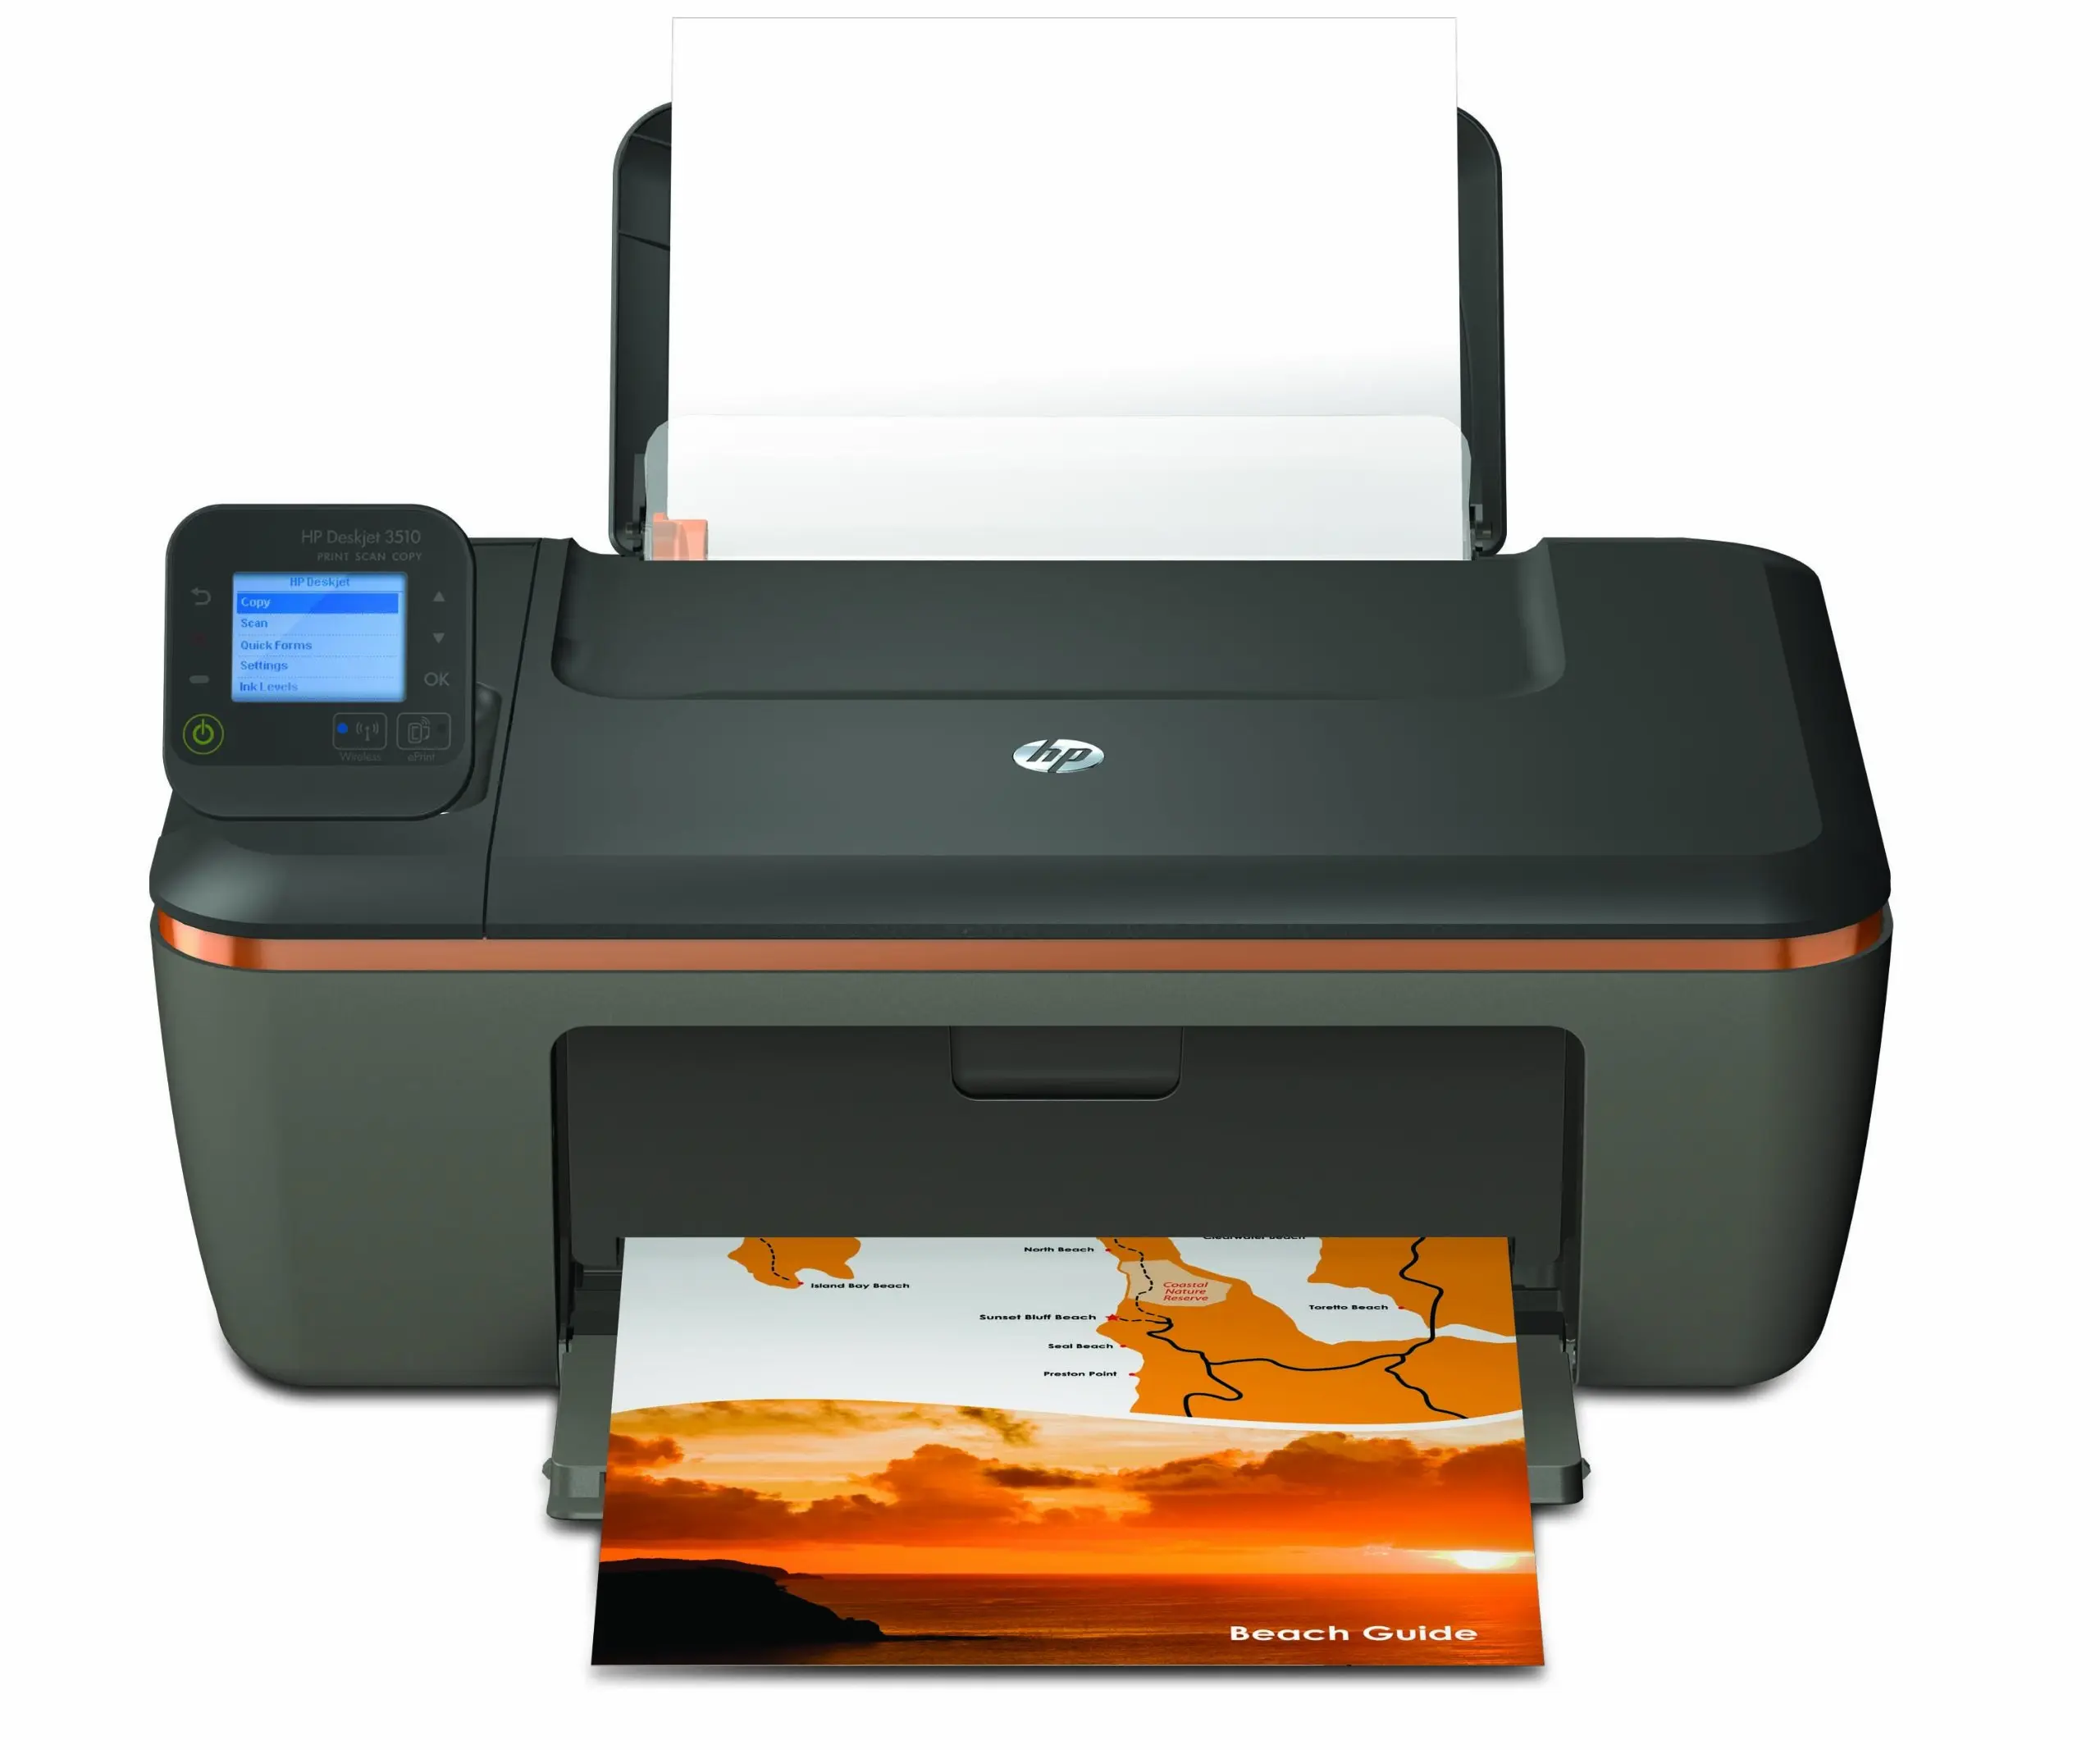 hewlett packard 3510 used - When did HP Deskjet 3510 come out